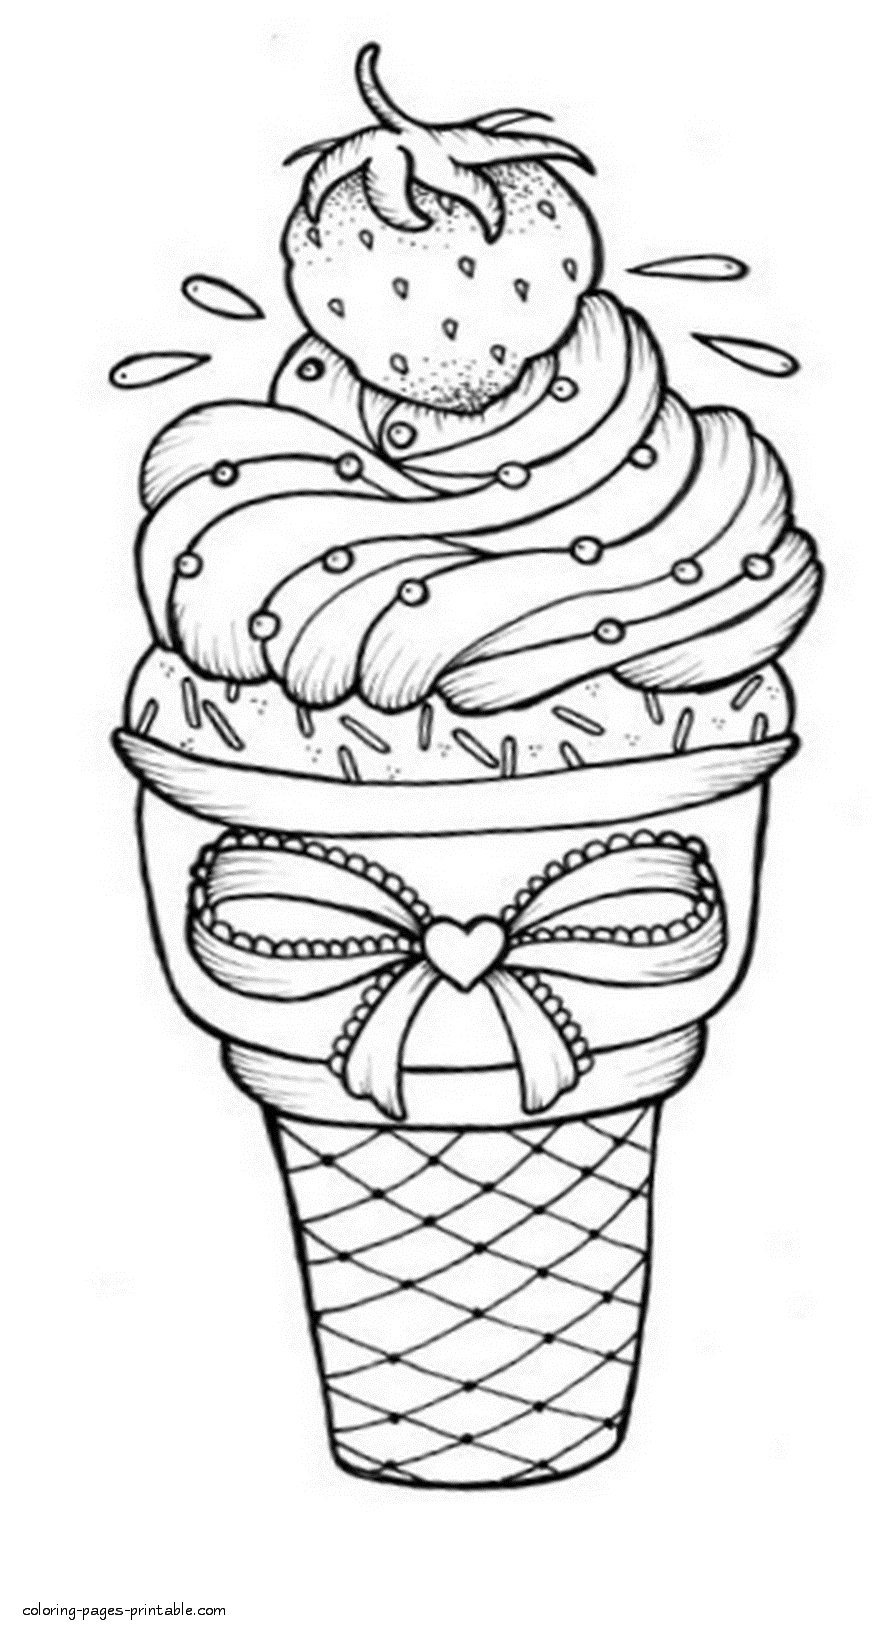 Coloring pages of ice cream || COLORING-PAGES-PRINTABLE.COM